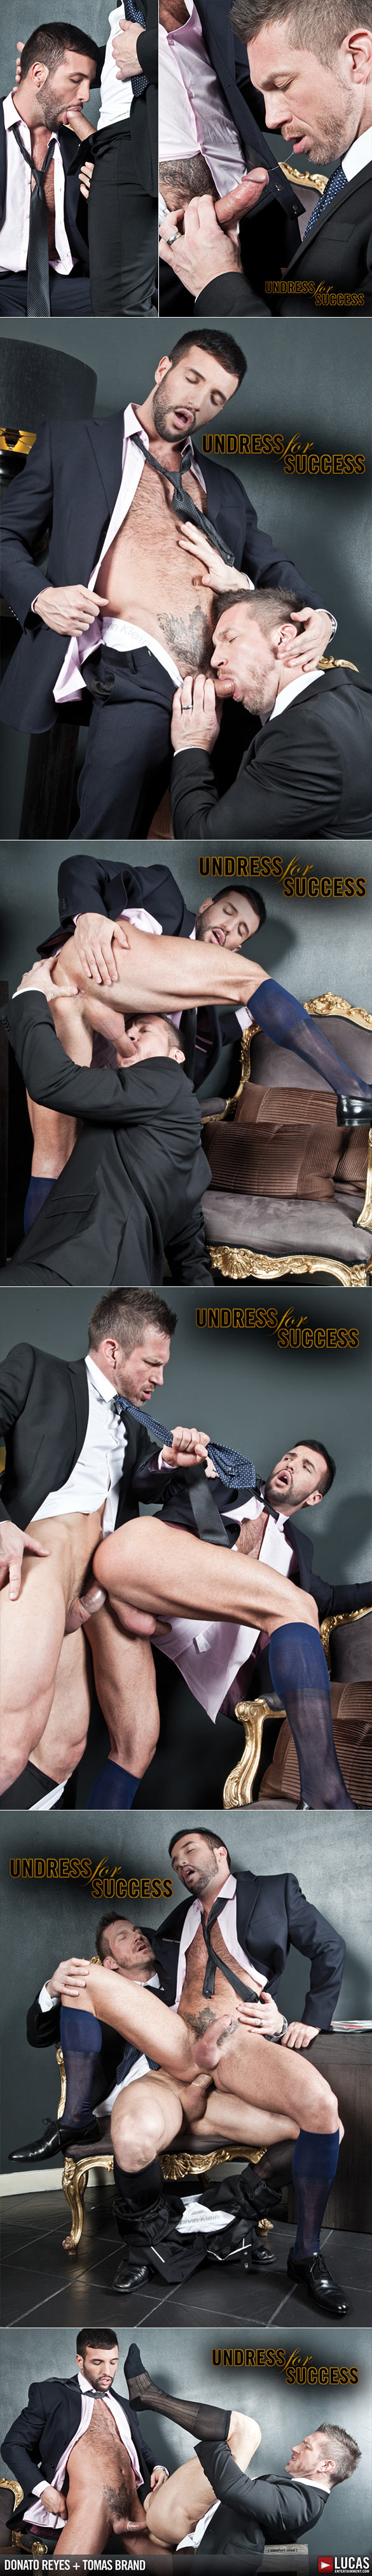 LucasEntertainment: Tomas Brand and Donato Reyes fuck after hours in “Gentlemen 07: Undress for Success”